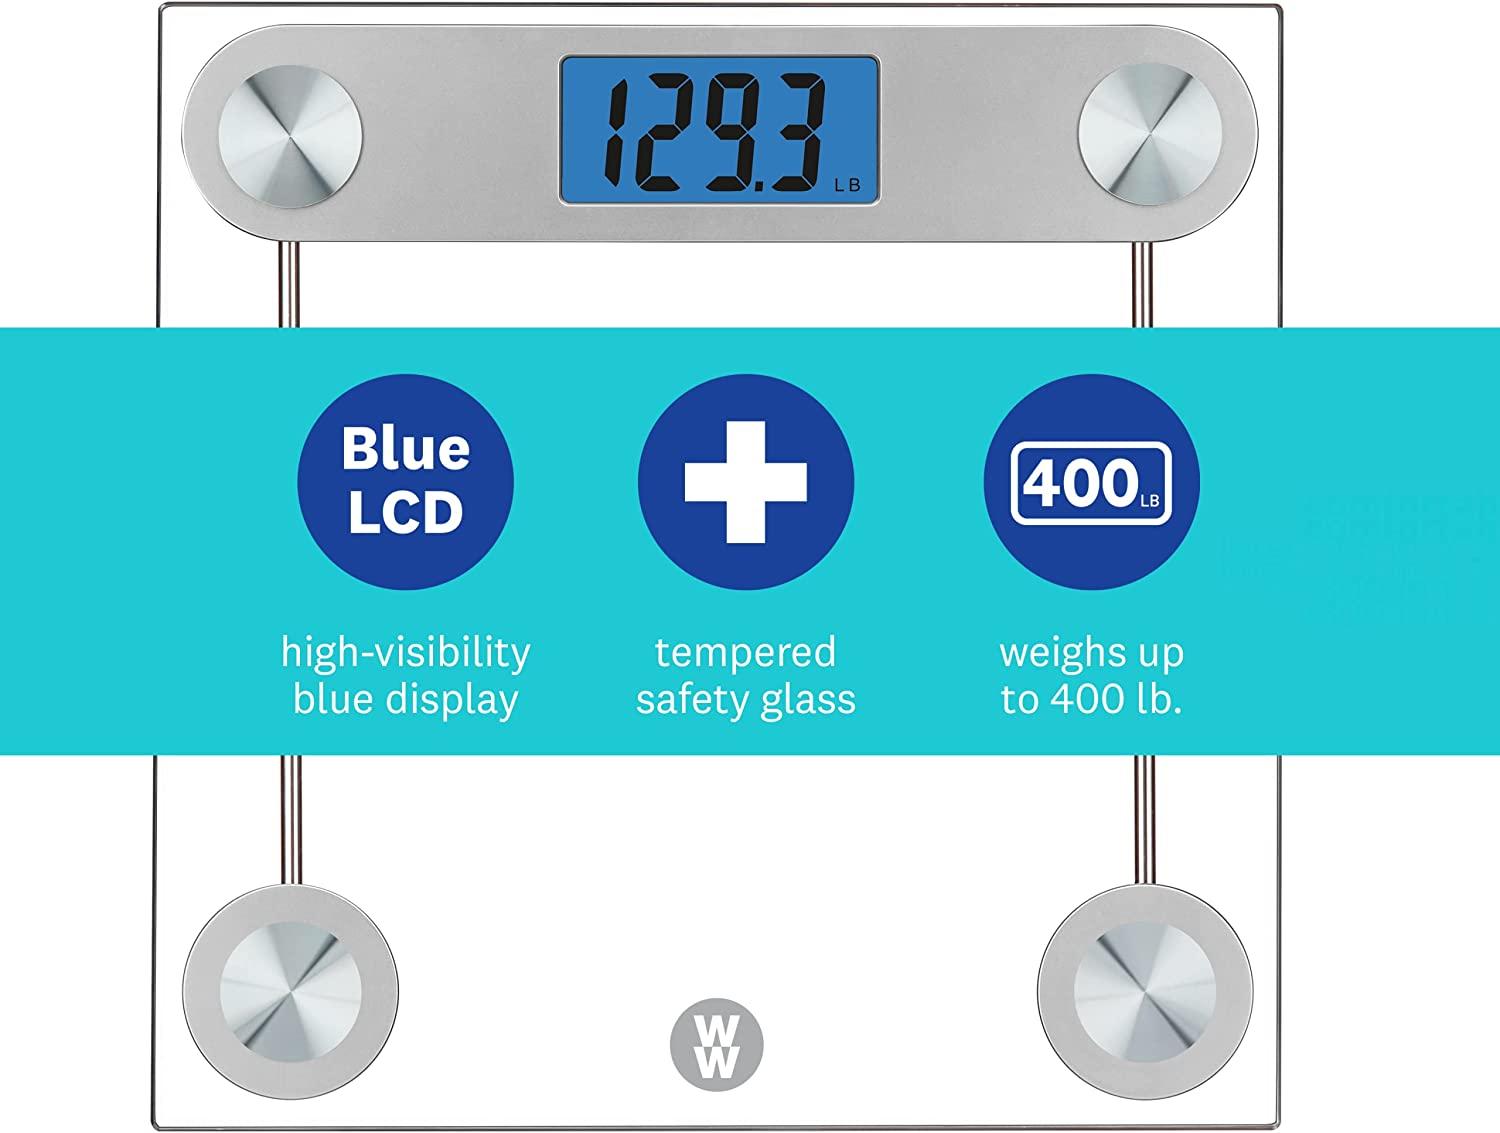 Weight Watchers Digital Weight Glass Scale with High Contrast Blue